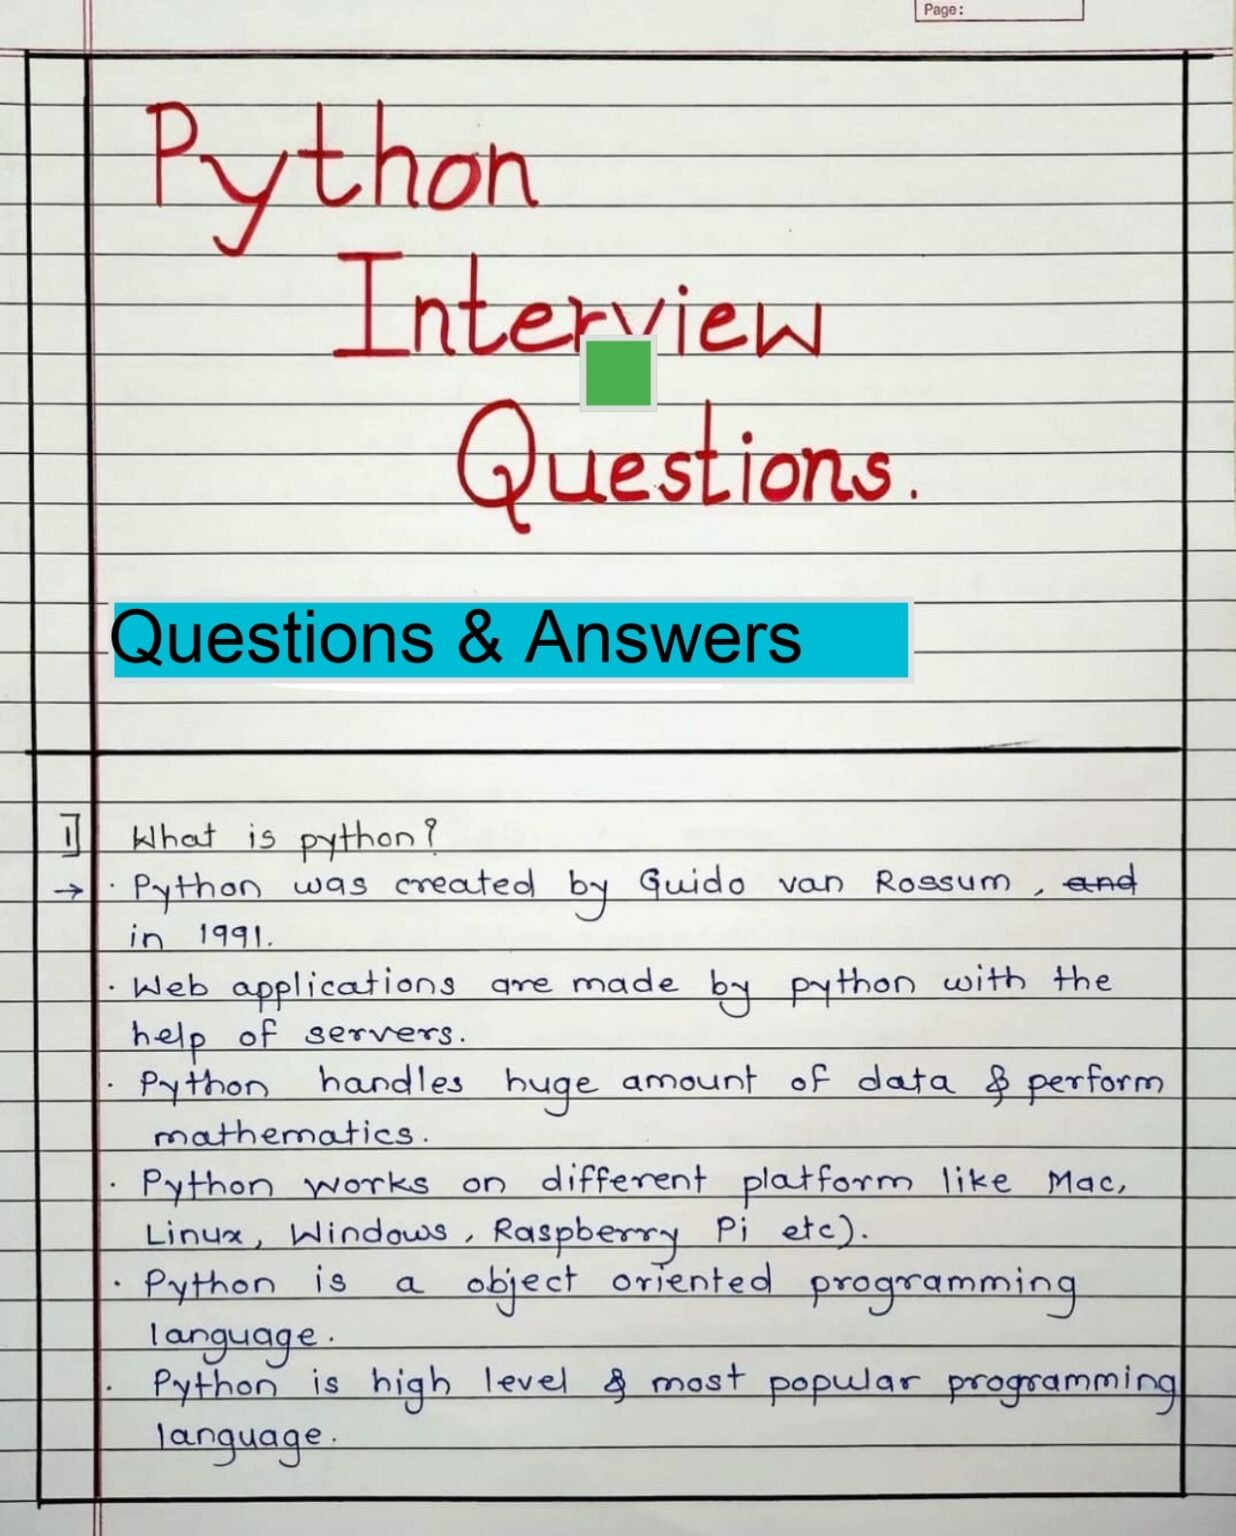 Python Interview Questions Answers Page 0001 1236x1536 